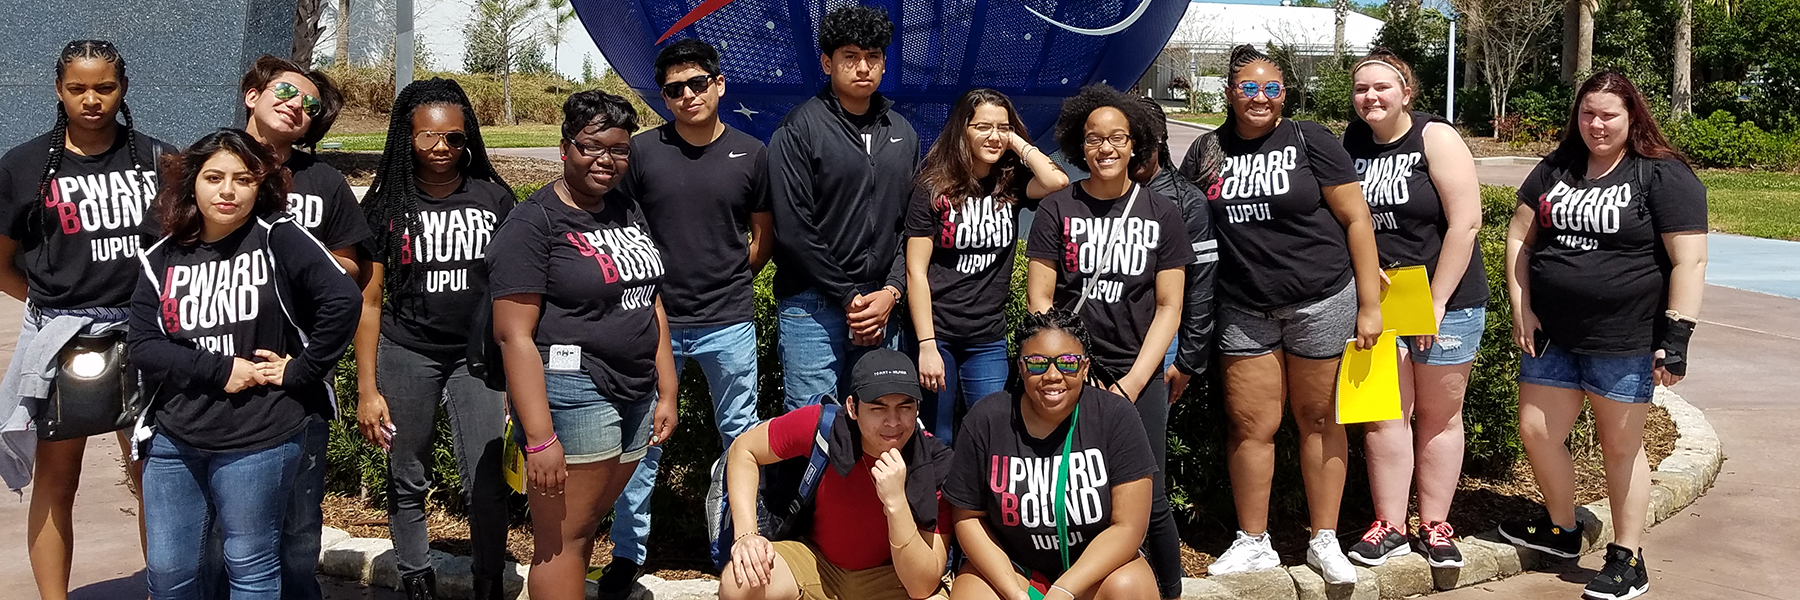 Upward Bound students in front of the NASA symbol.